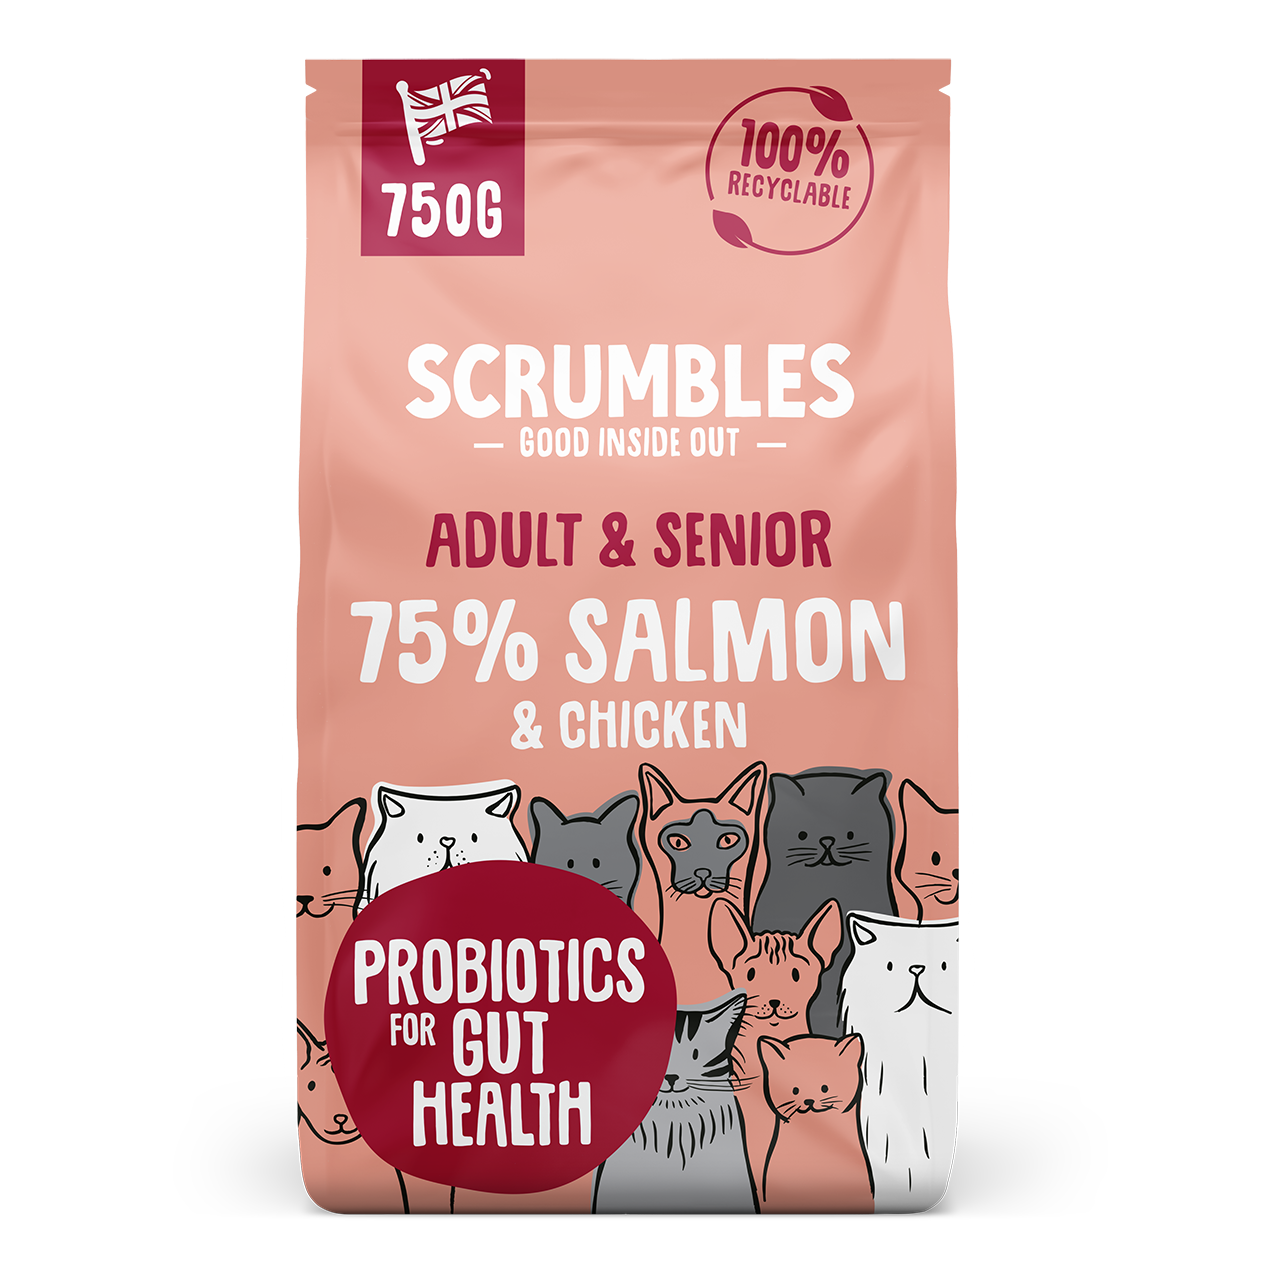 salmon-and-chicken-dry-cat-food-scrumbles-dry-cat-food-adult-cat-food-black-friday-cat-food-dry-cat-food-gluten-free-cat-food-high-protein-cat-food-hypoallergenic-cat-food-kitten-food-natural-cat-food-senior-cat-food-sensitive-stomach-cat-food